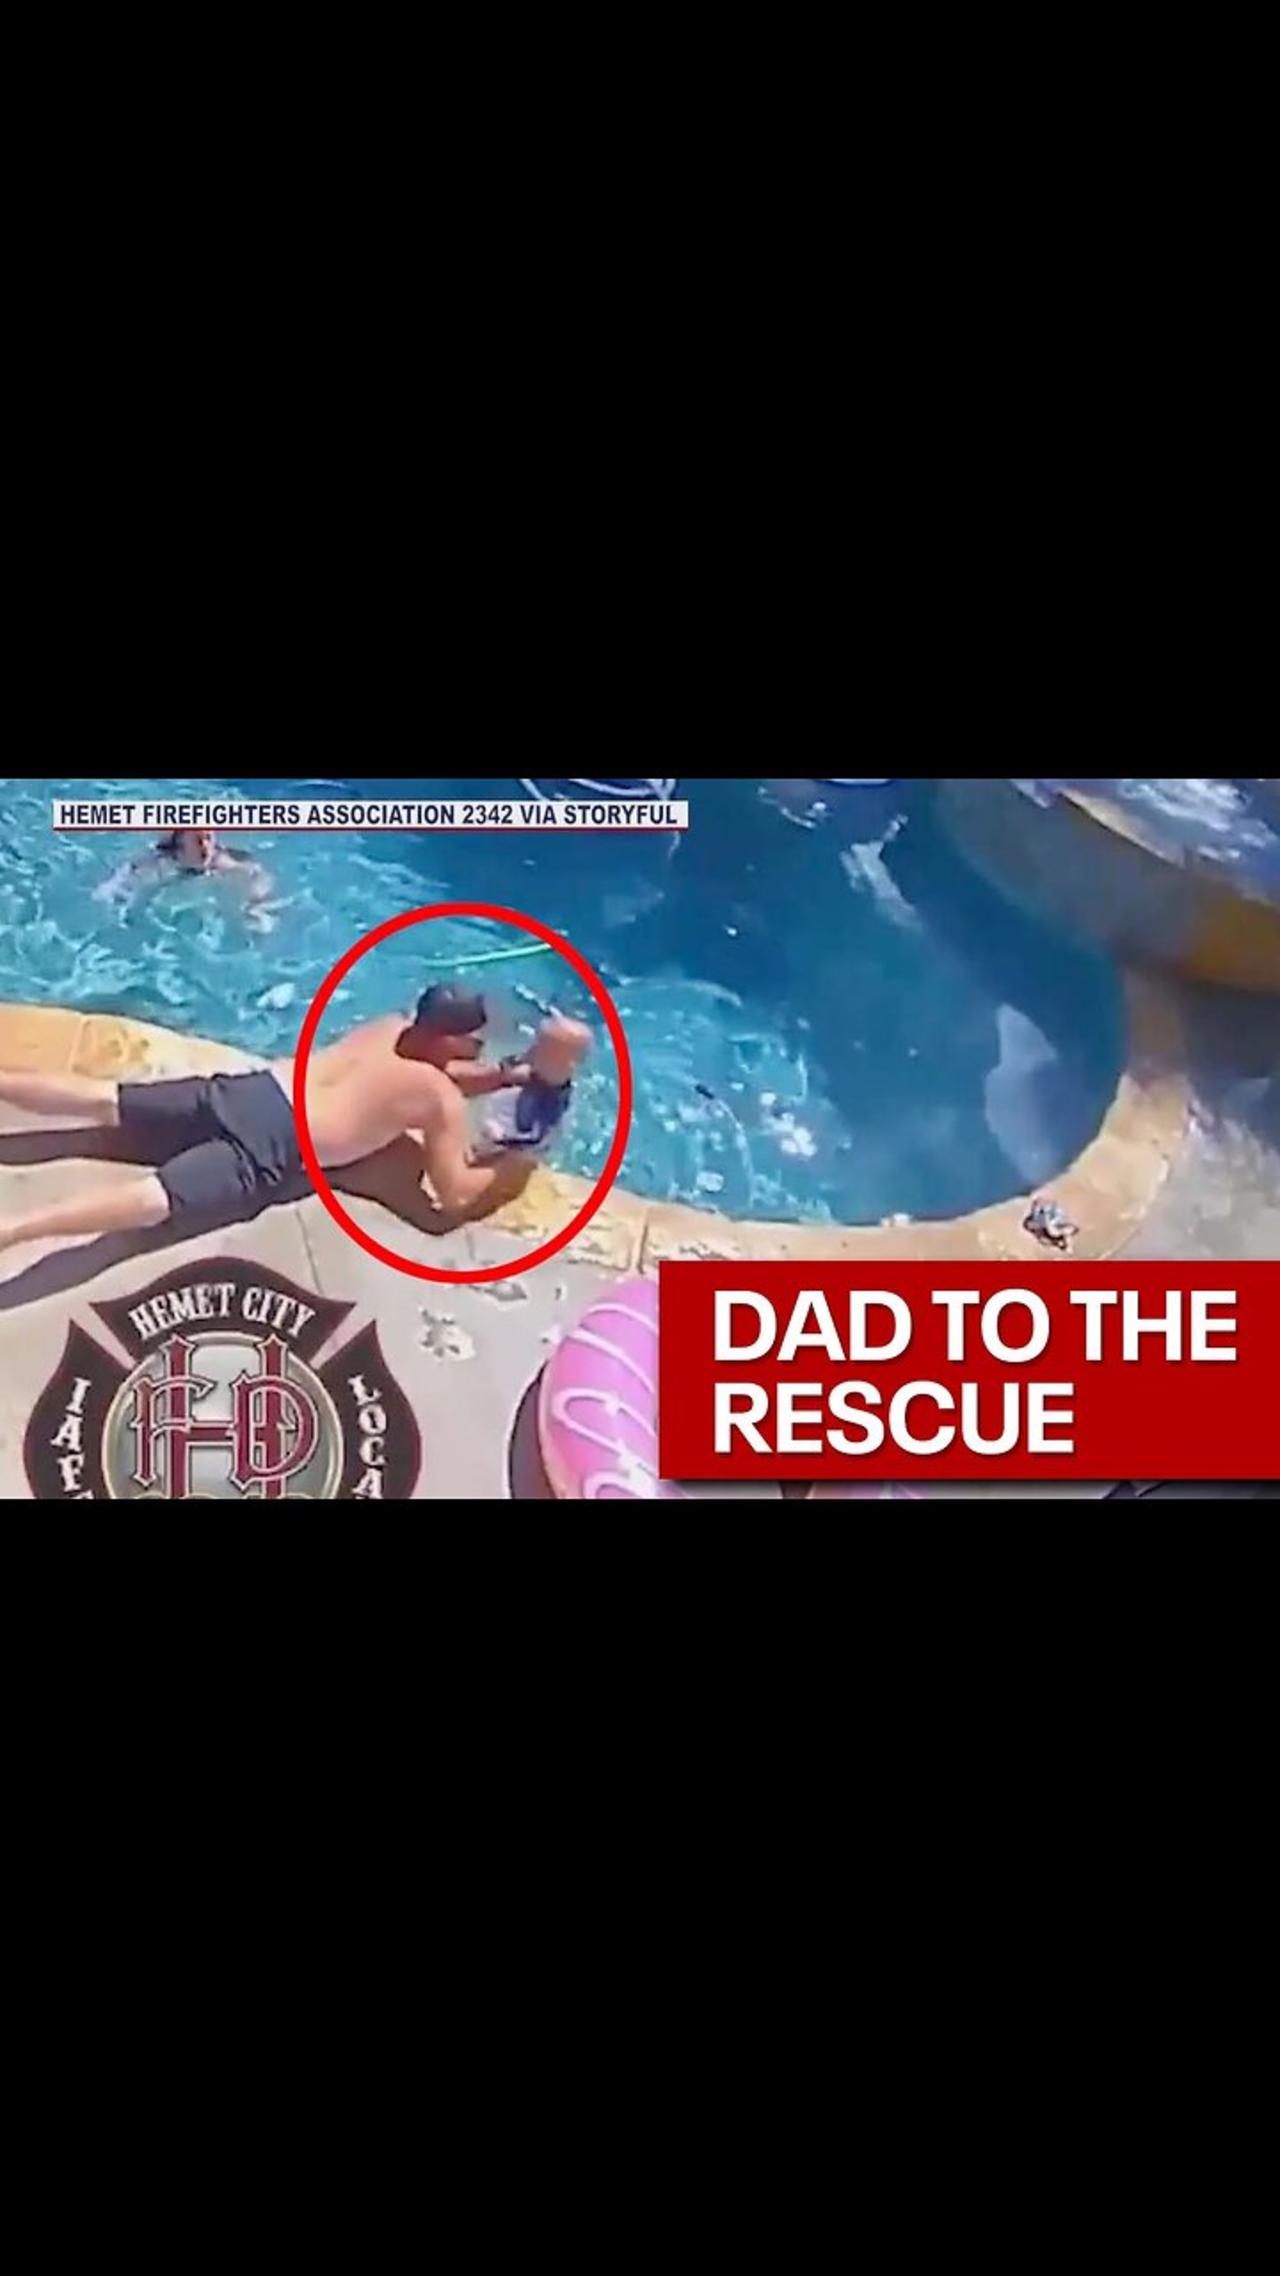 DAD SAVES SON FROM FALLING